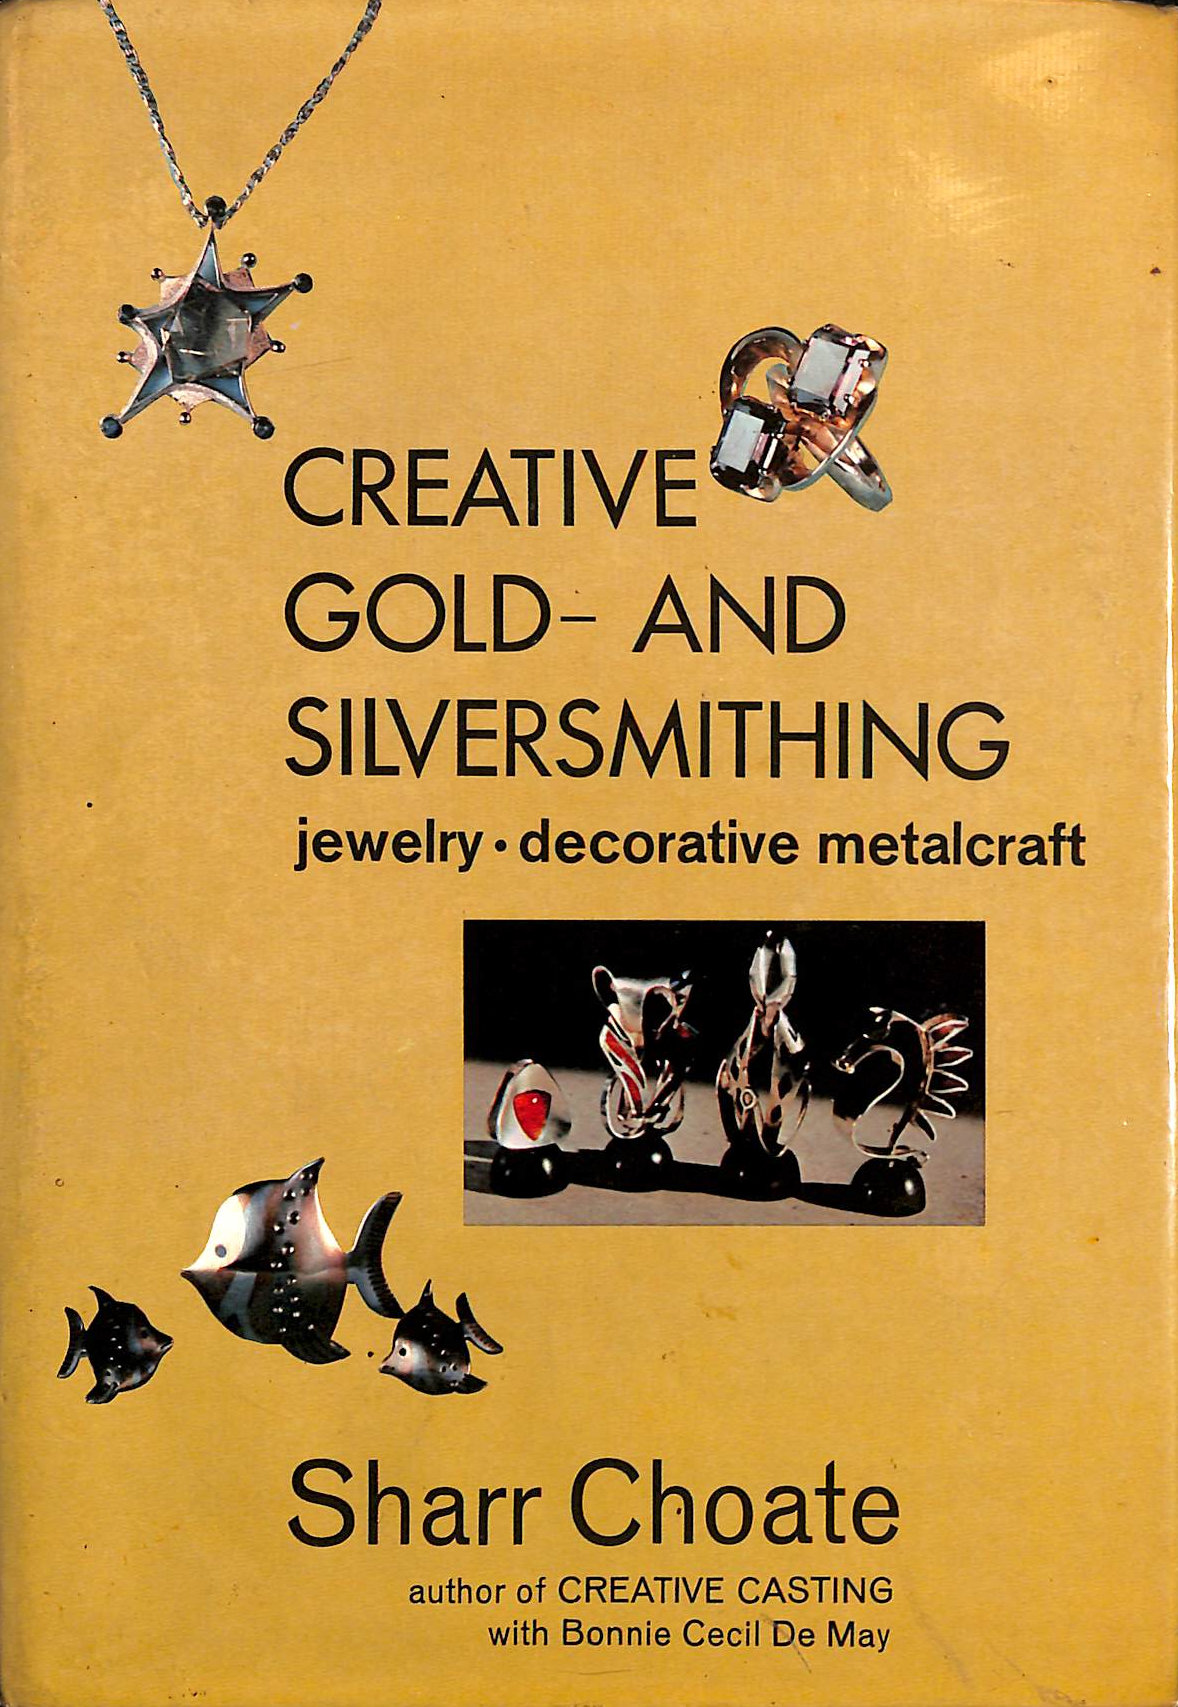 S CHOATE - Creative Gold and Silversmithing: jewelry, decorative metalcraft (Creative Arts & Crafts) (Creative Arts & Crafts S.)